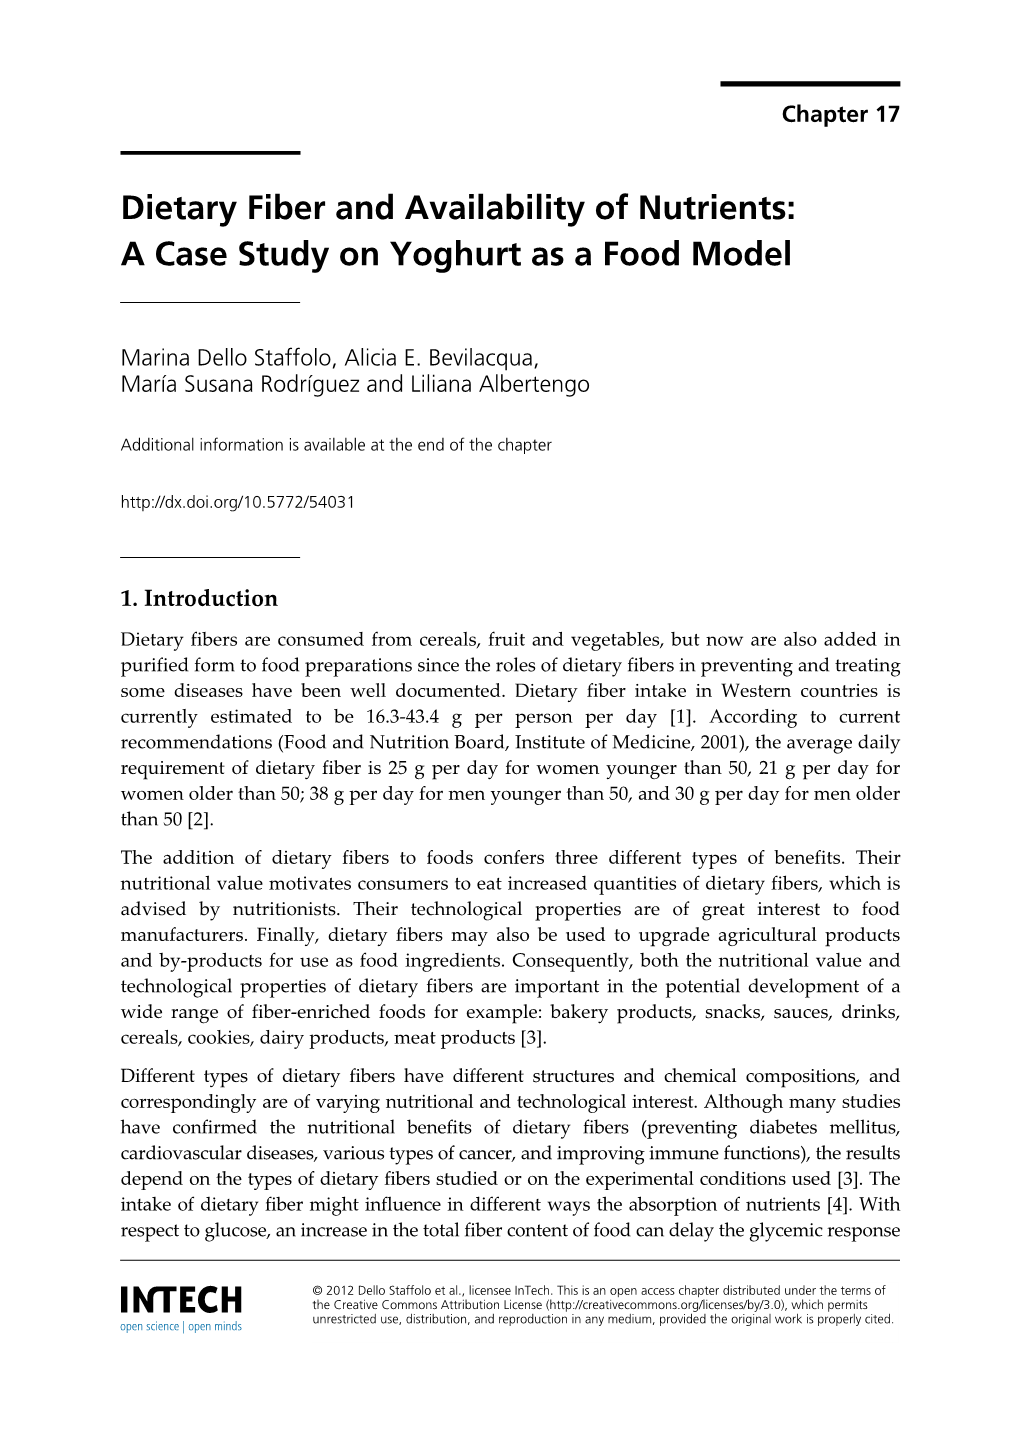 Dietary Fiber and Availability of Nutrients: a Case Study on Yoghurt As a Food Model